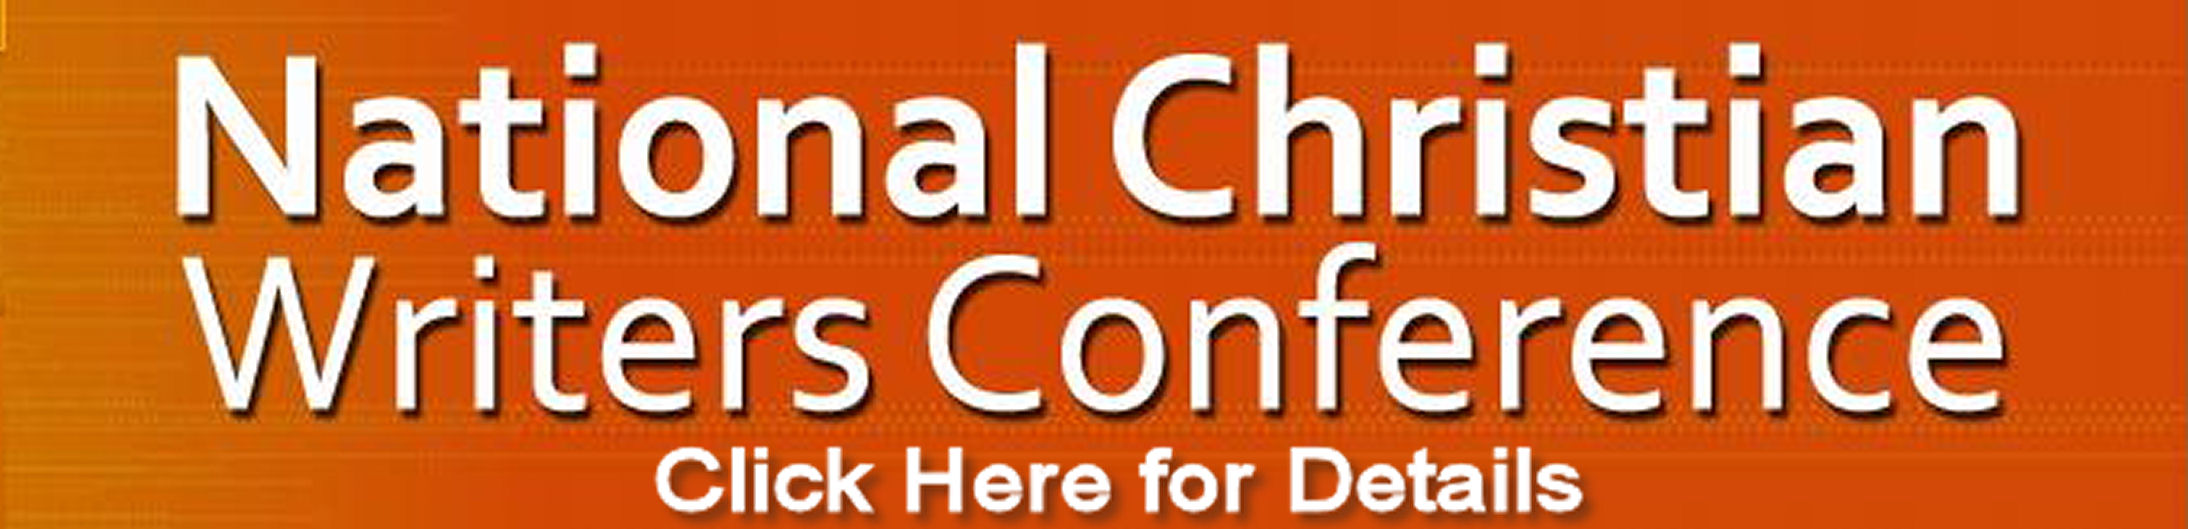 National Christian Writers Conference